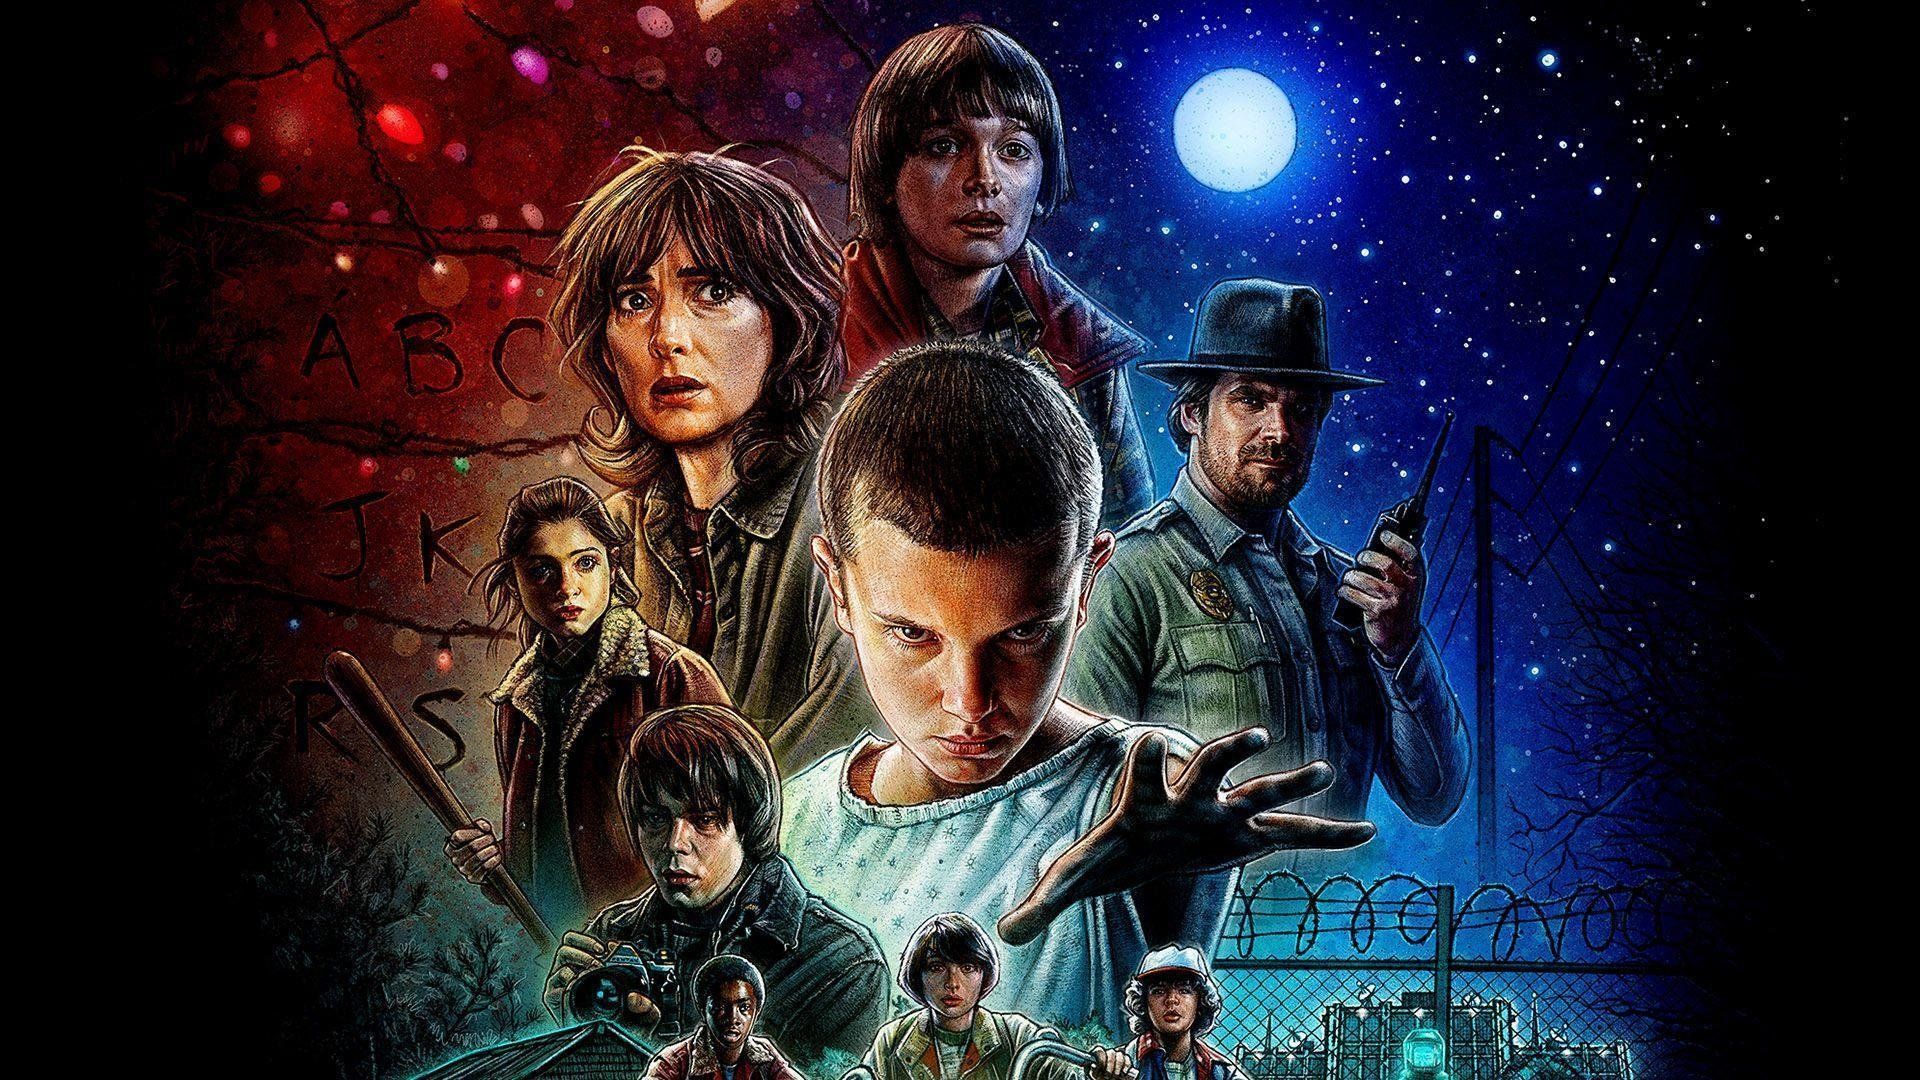 Quality Wallpaper Picture Of Stranger Things